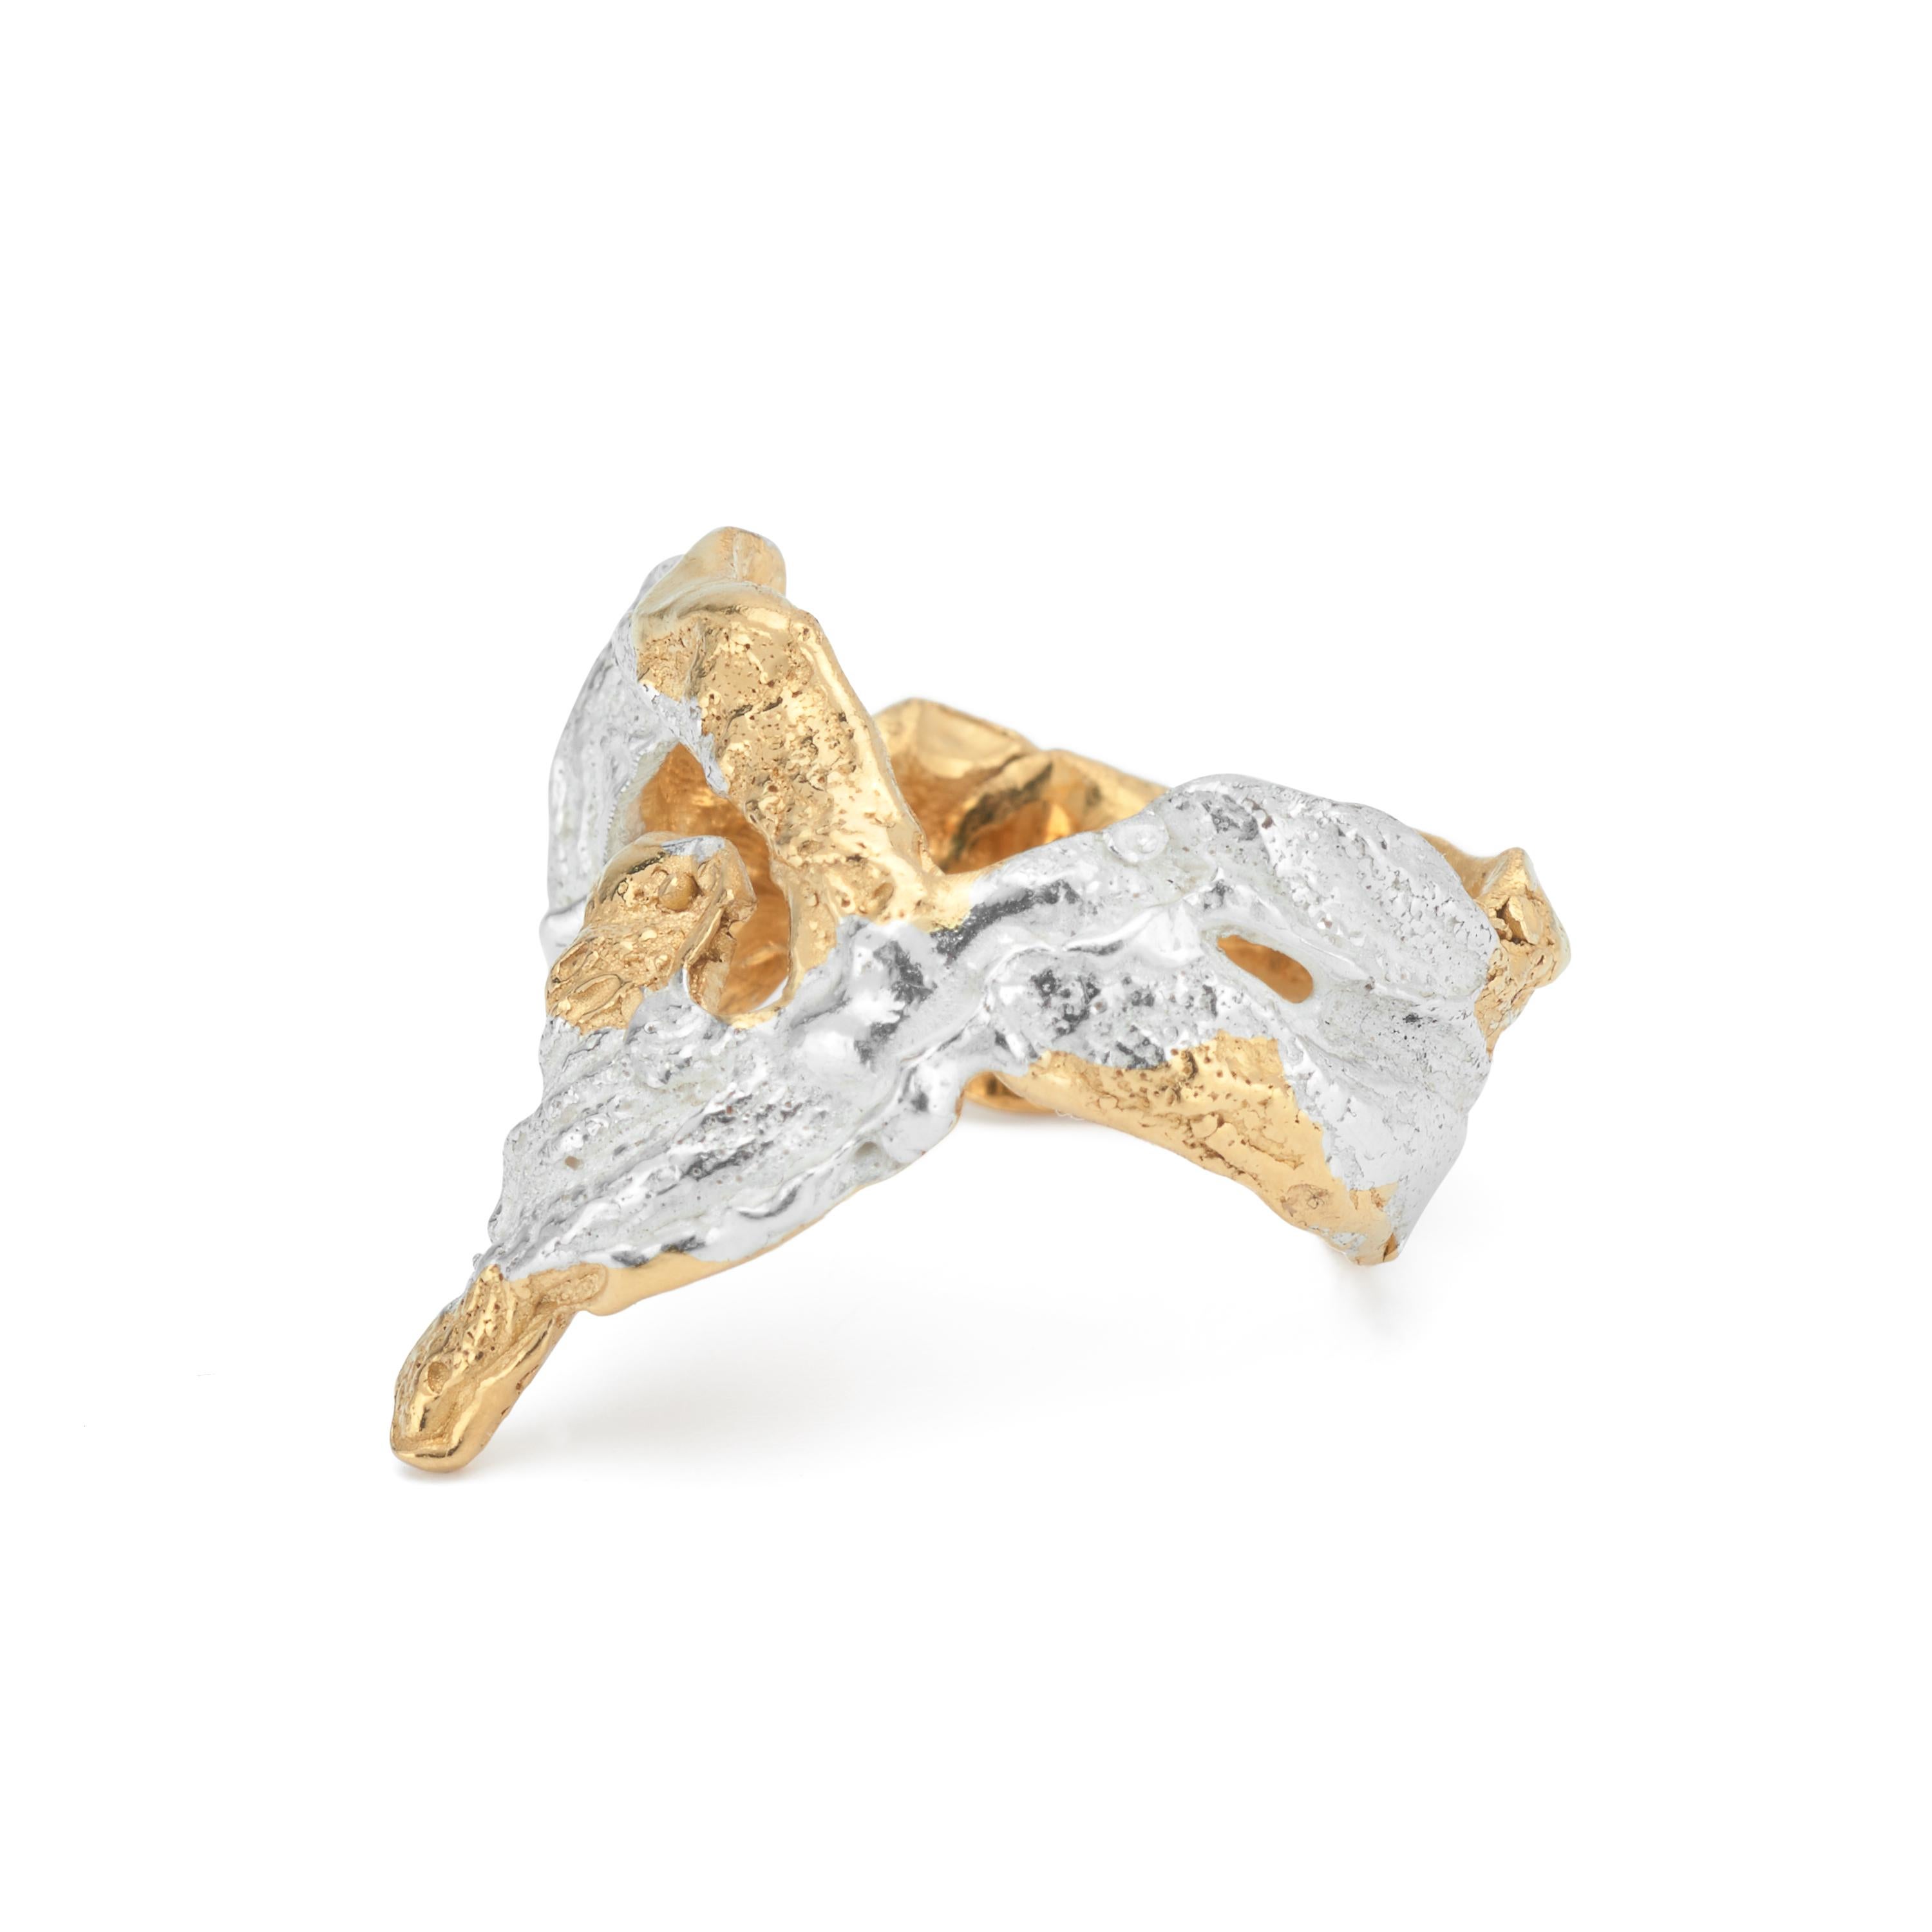 Ela is Hebrew for ‘oak’, a tree symbolising strength, fortitude, and optimism. The twisting shape and distinctive knotted surface of this ring echo the spiral leaf patterns and gnarled bark texture of the oak tree: rugged but beautiful, each groove